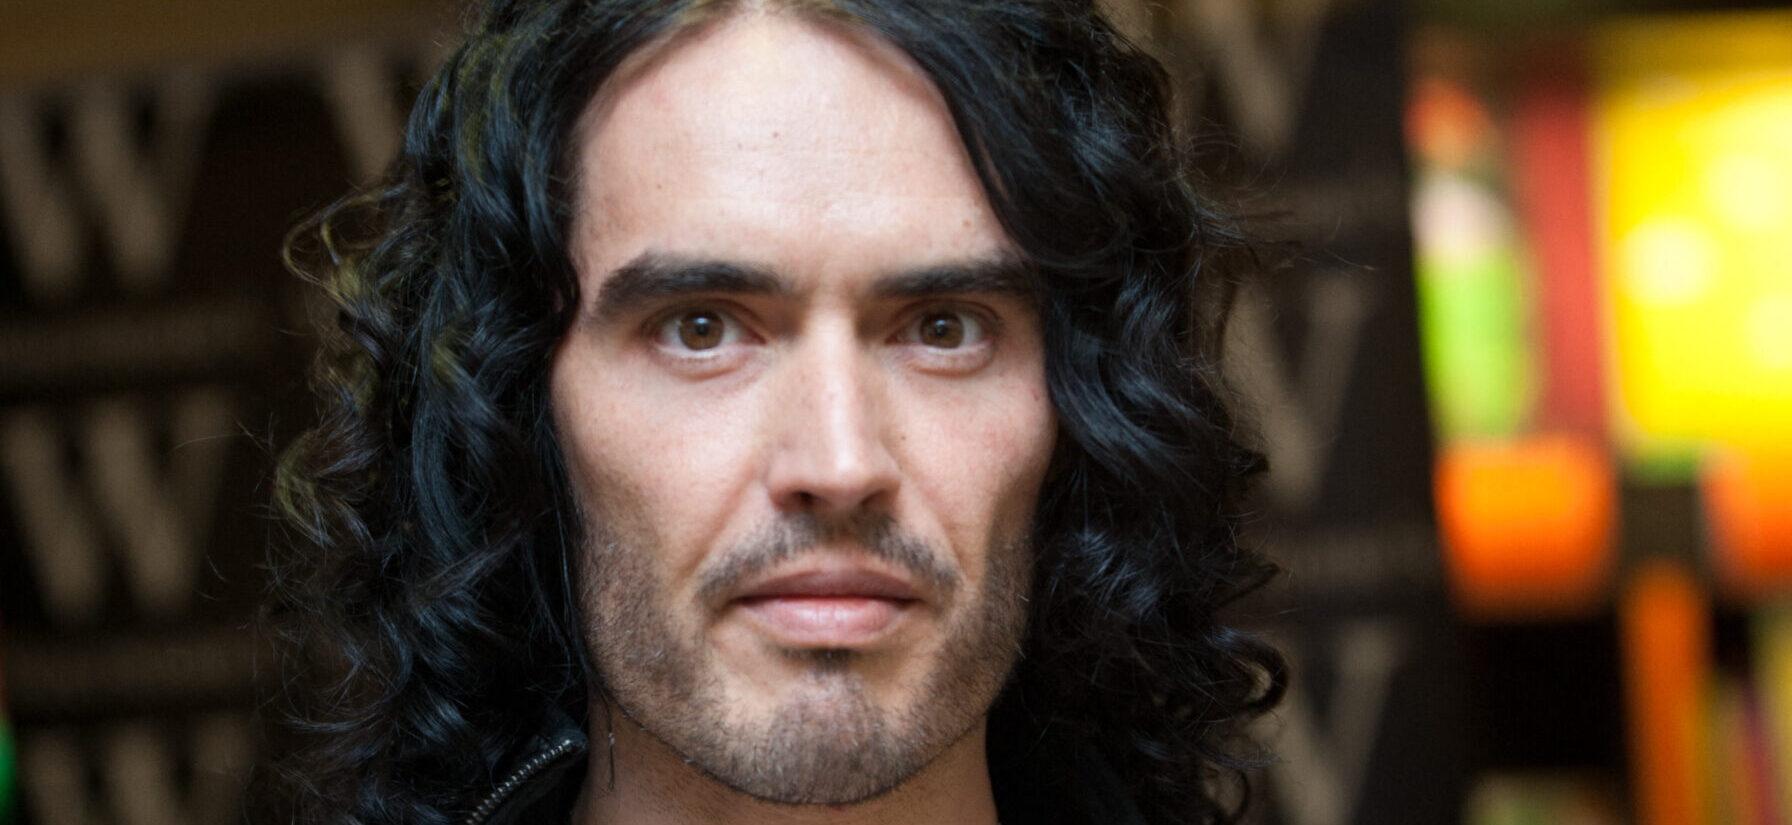 Fans Believe Russell Brand Is Being Silenced For Speaking ‘Truth’ Against Government